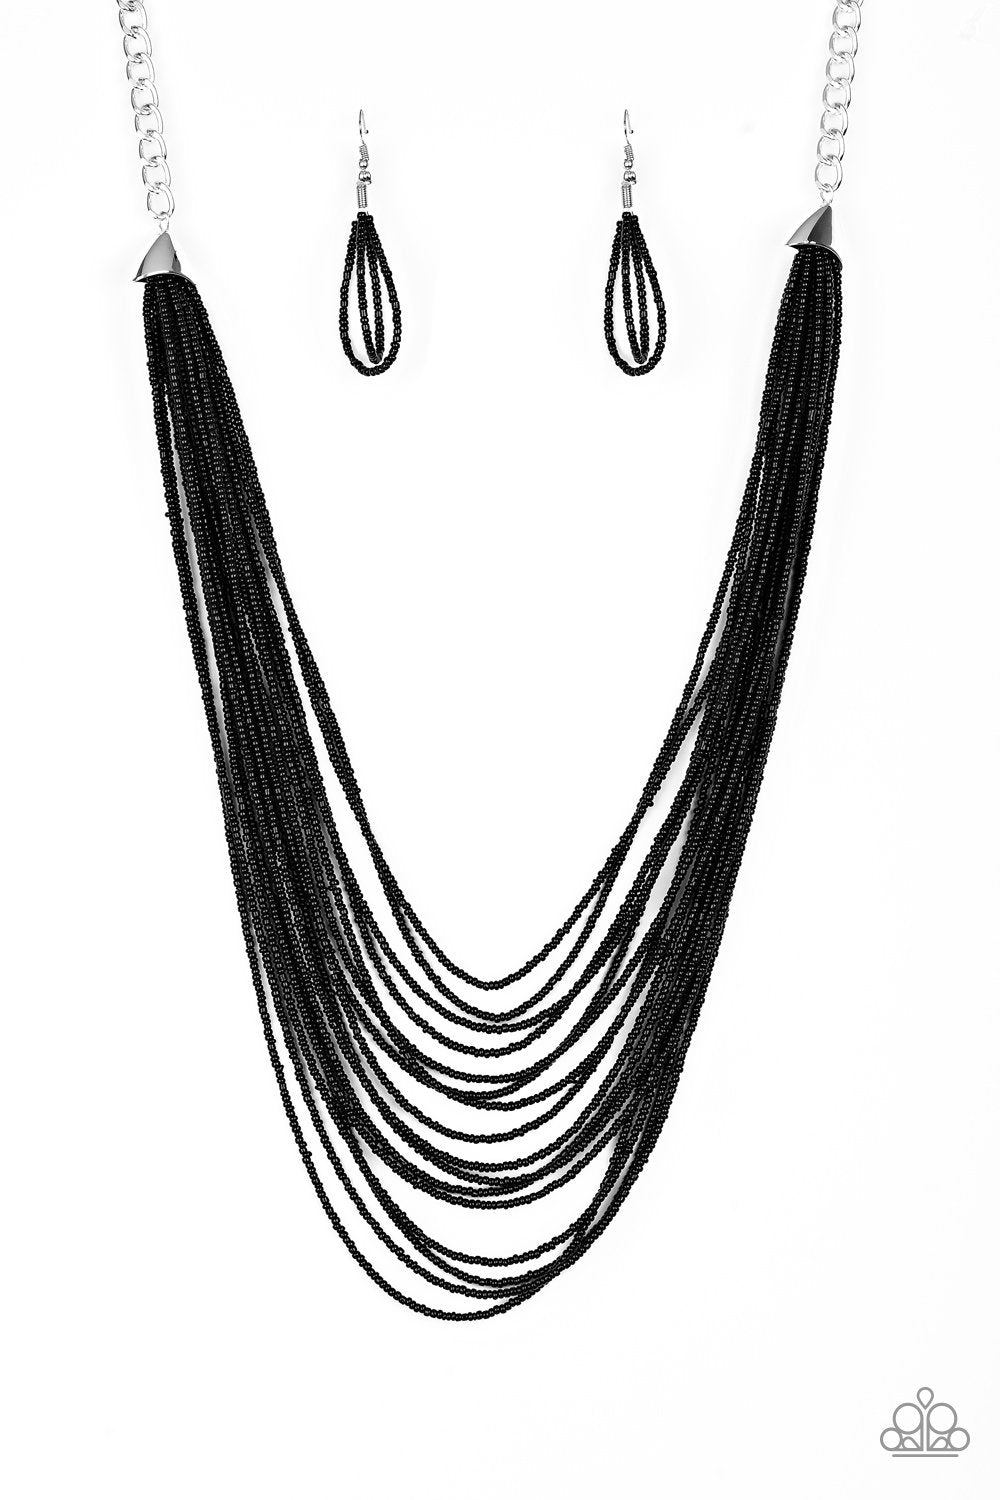 Peacefully Pacific Black Seed Bead Necklace - Paparazzi Accessories-CarasShop.com - $5 Jewelry by Cara Jewels